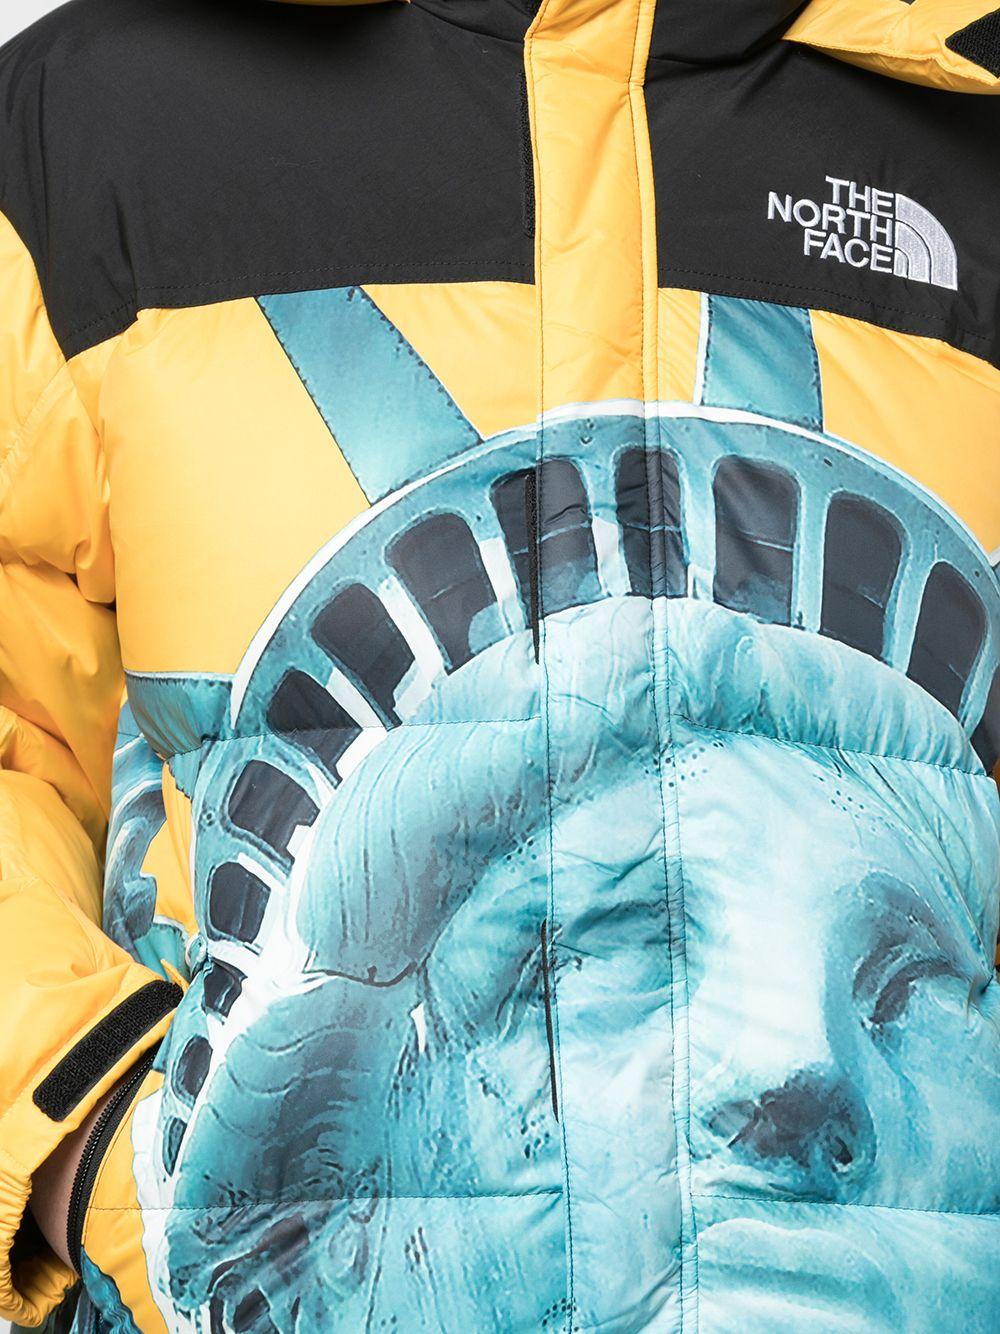 Supreme Goose X The North Face Baltoro Jacket in Yellow for Men - Lyst